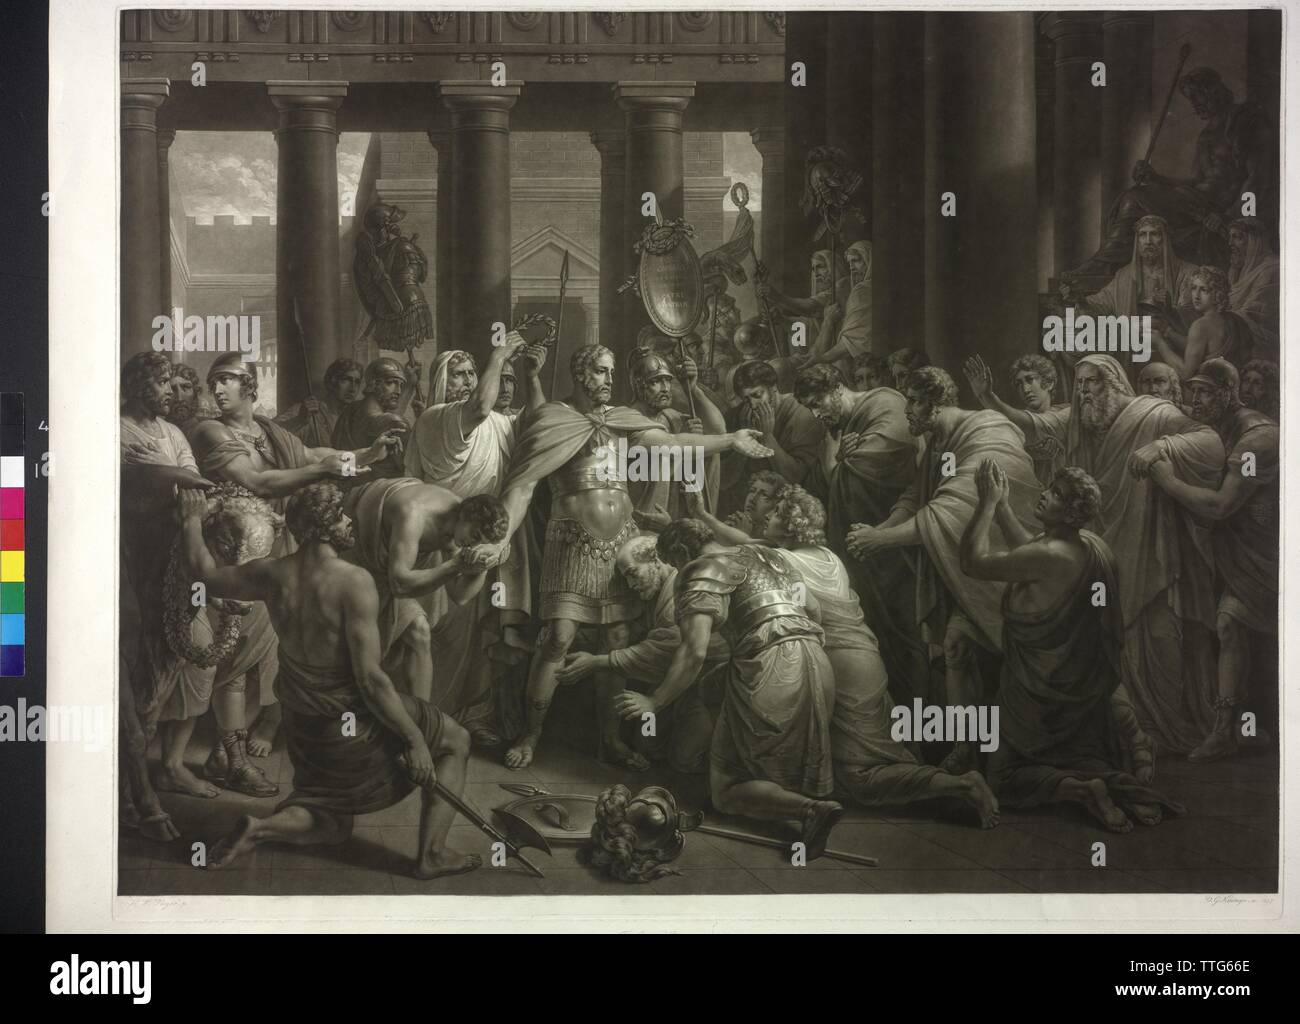 Camillus is to the strongman appeal, from the Roman history (Livy, Roman story, V-VI), mezzotint by Vincenz Georg Kininger from 1827 based on painting by Henry Frederick Fueger. before the script, Additional-Rights-Clearance-Info-Not-Available Stock Photo